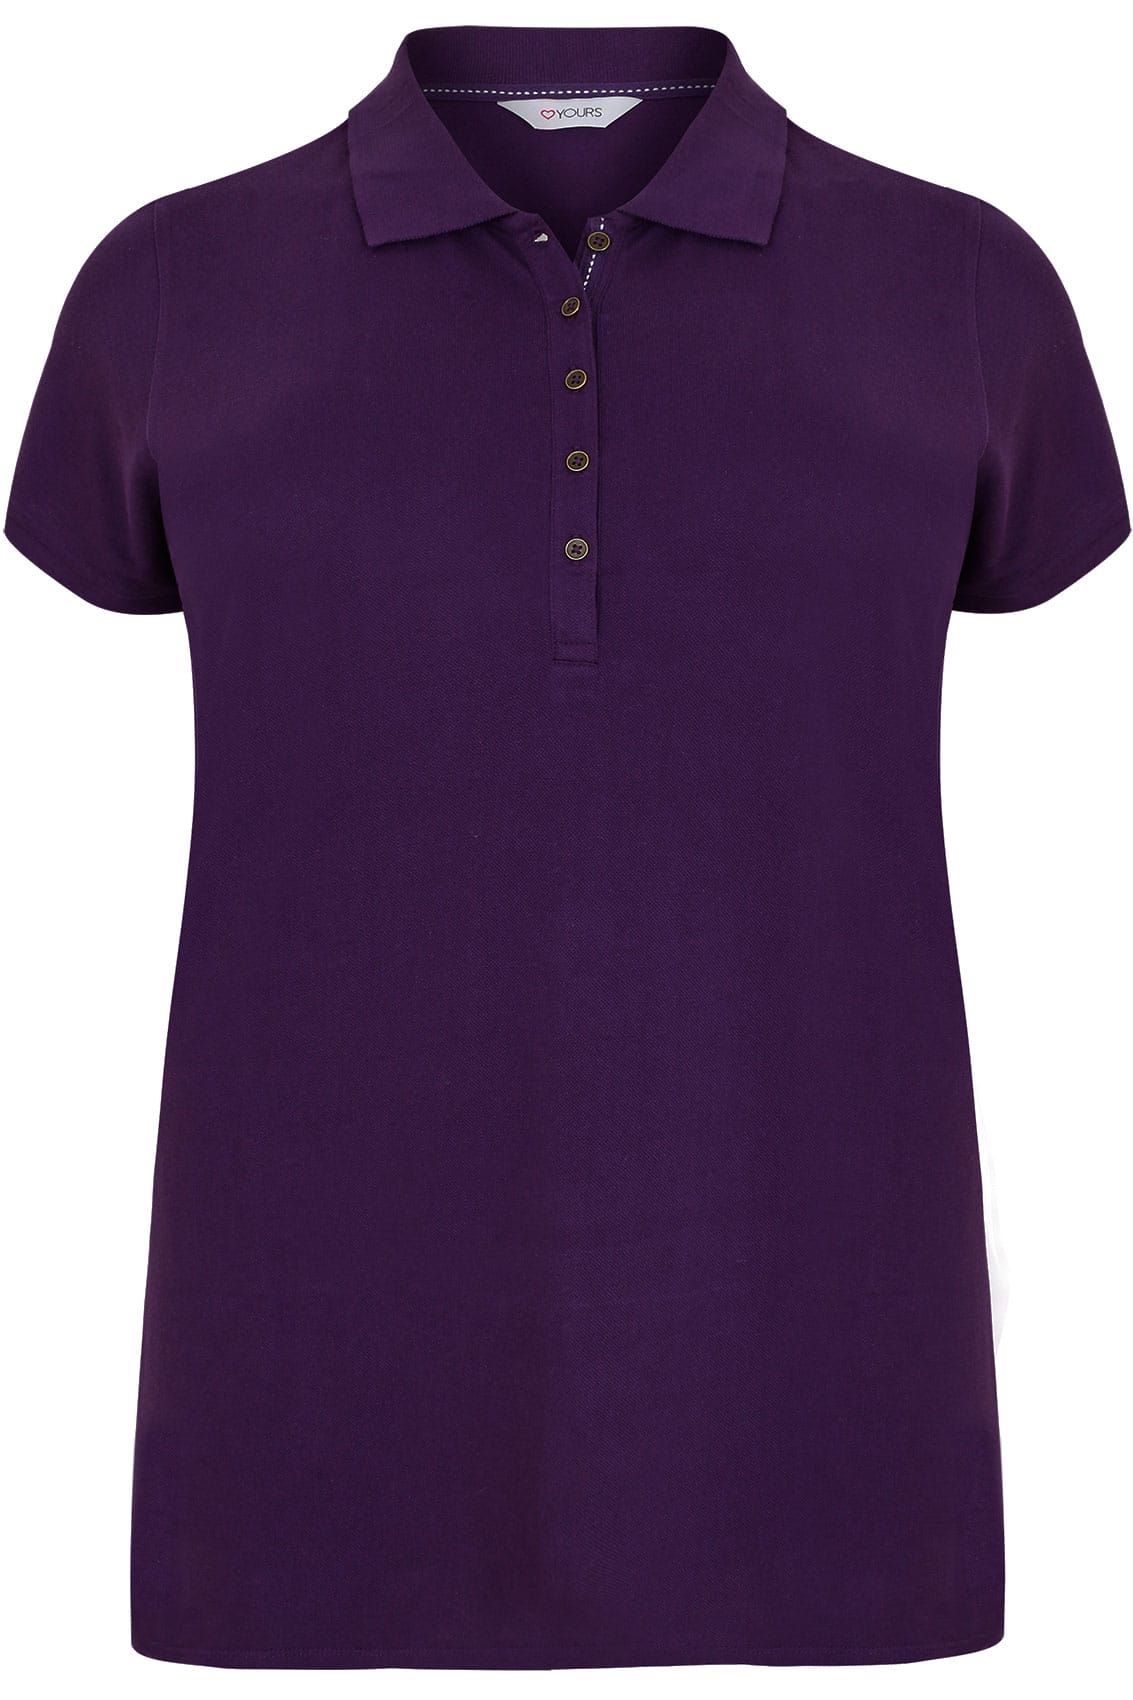 Purple Button Up Polo Shirt, Plus size 16 to 36